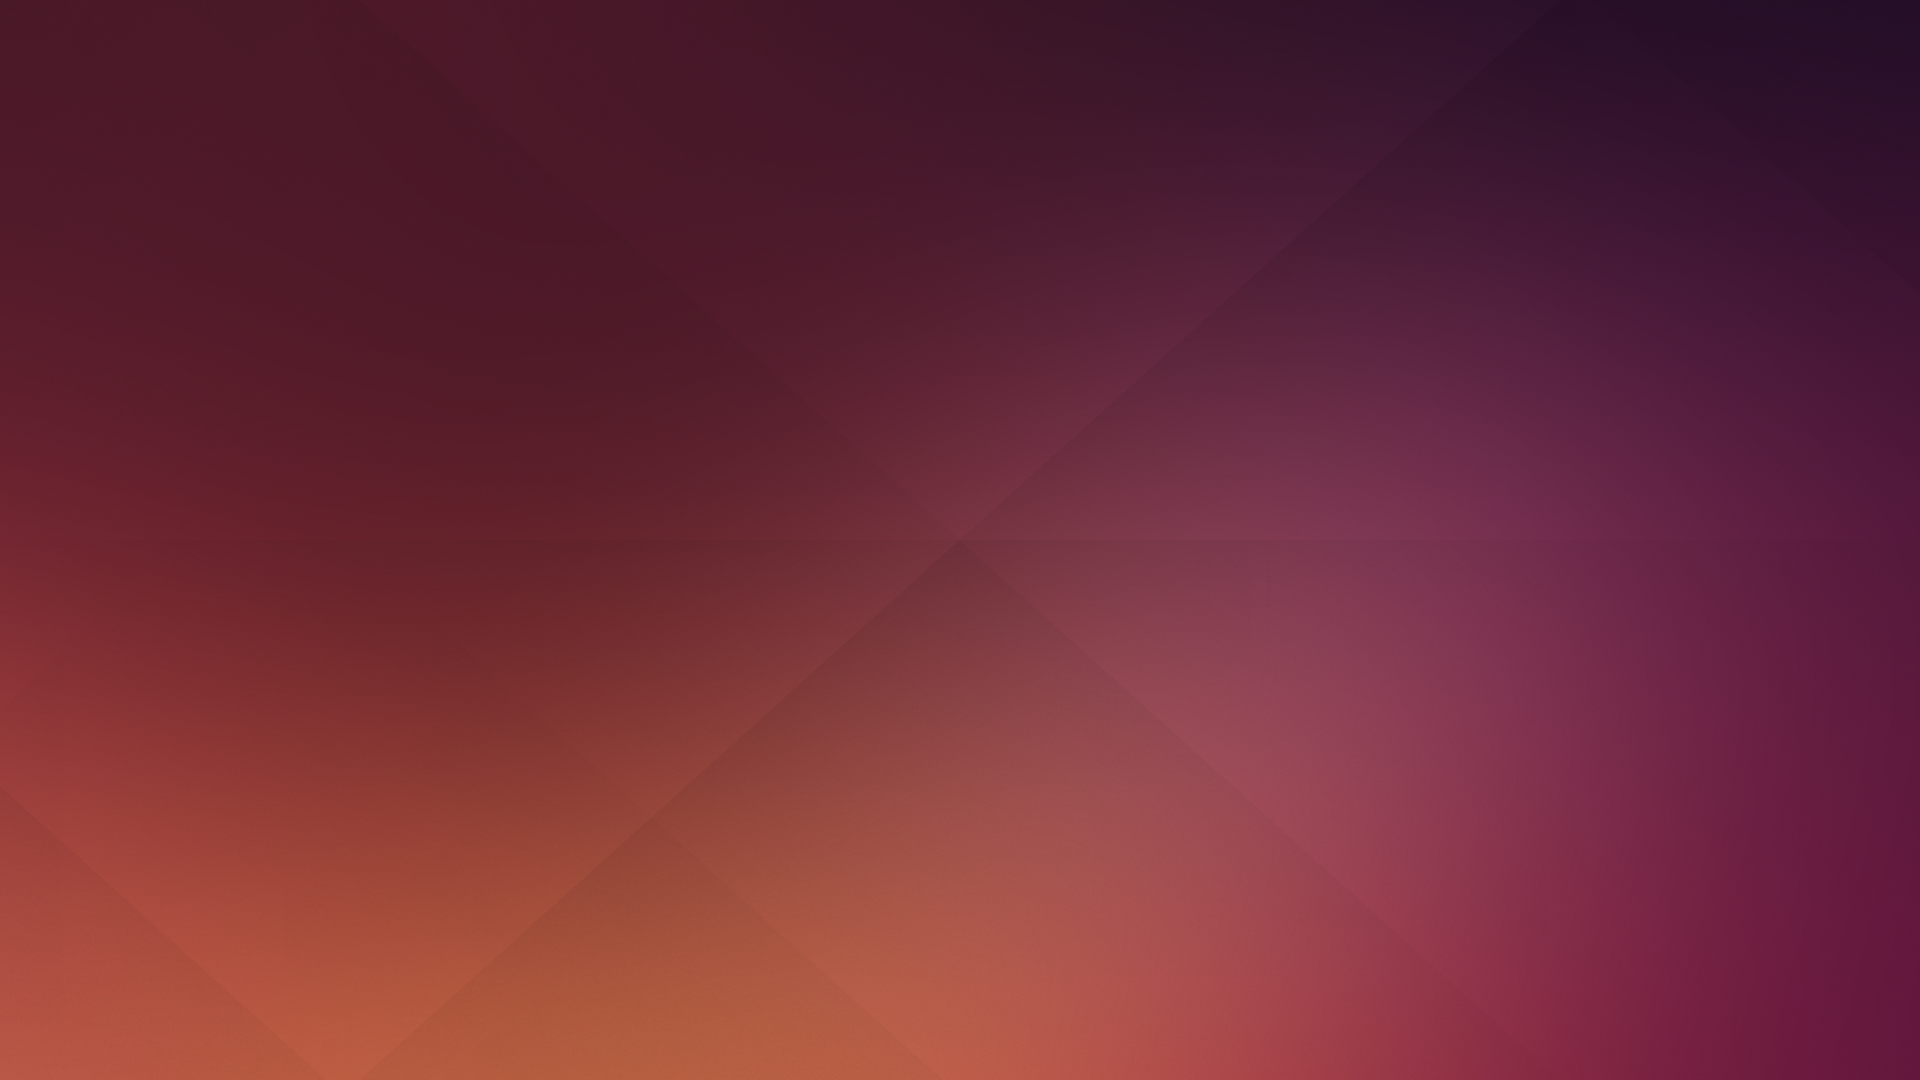 Ubuntu default wallpapers 404 1404 1920x1080 by o l a v on 1920x1080